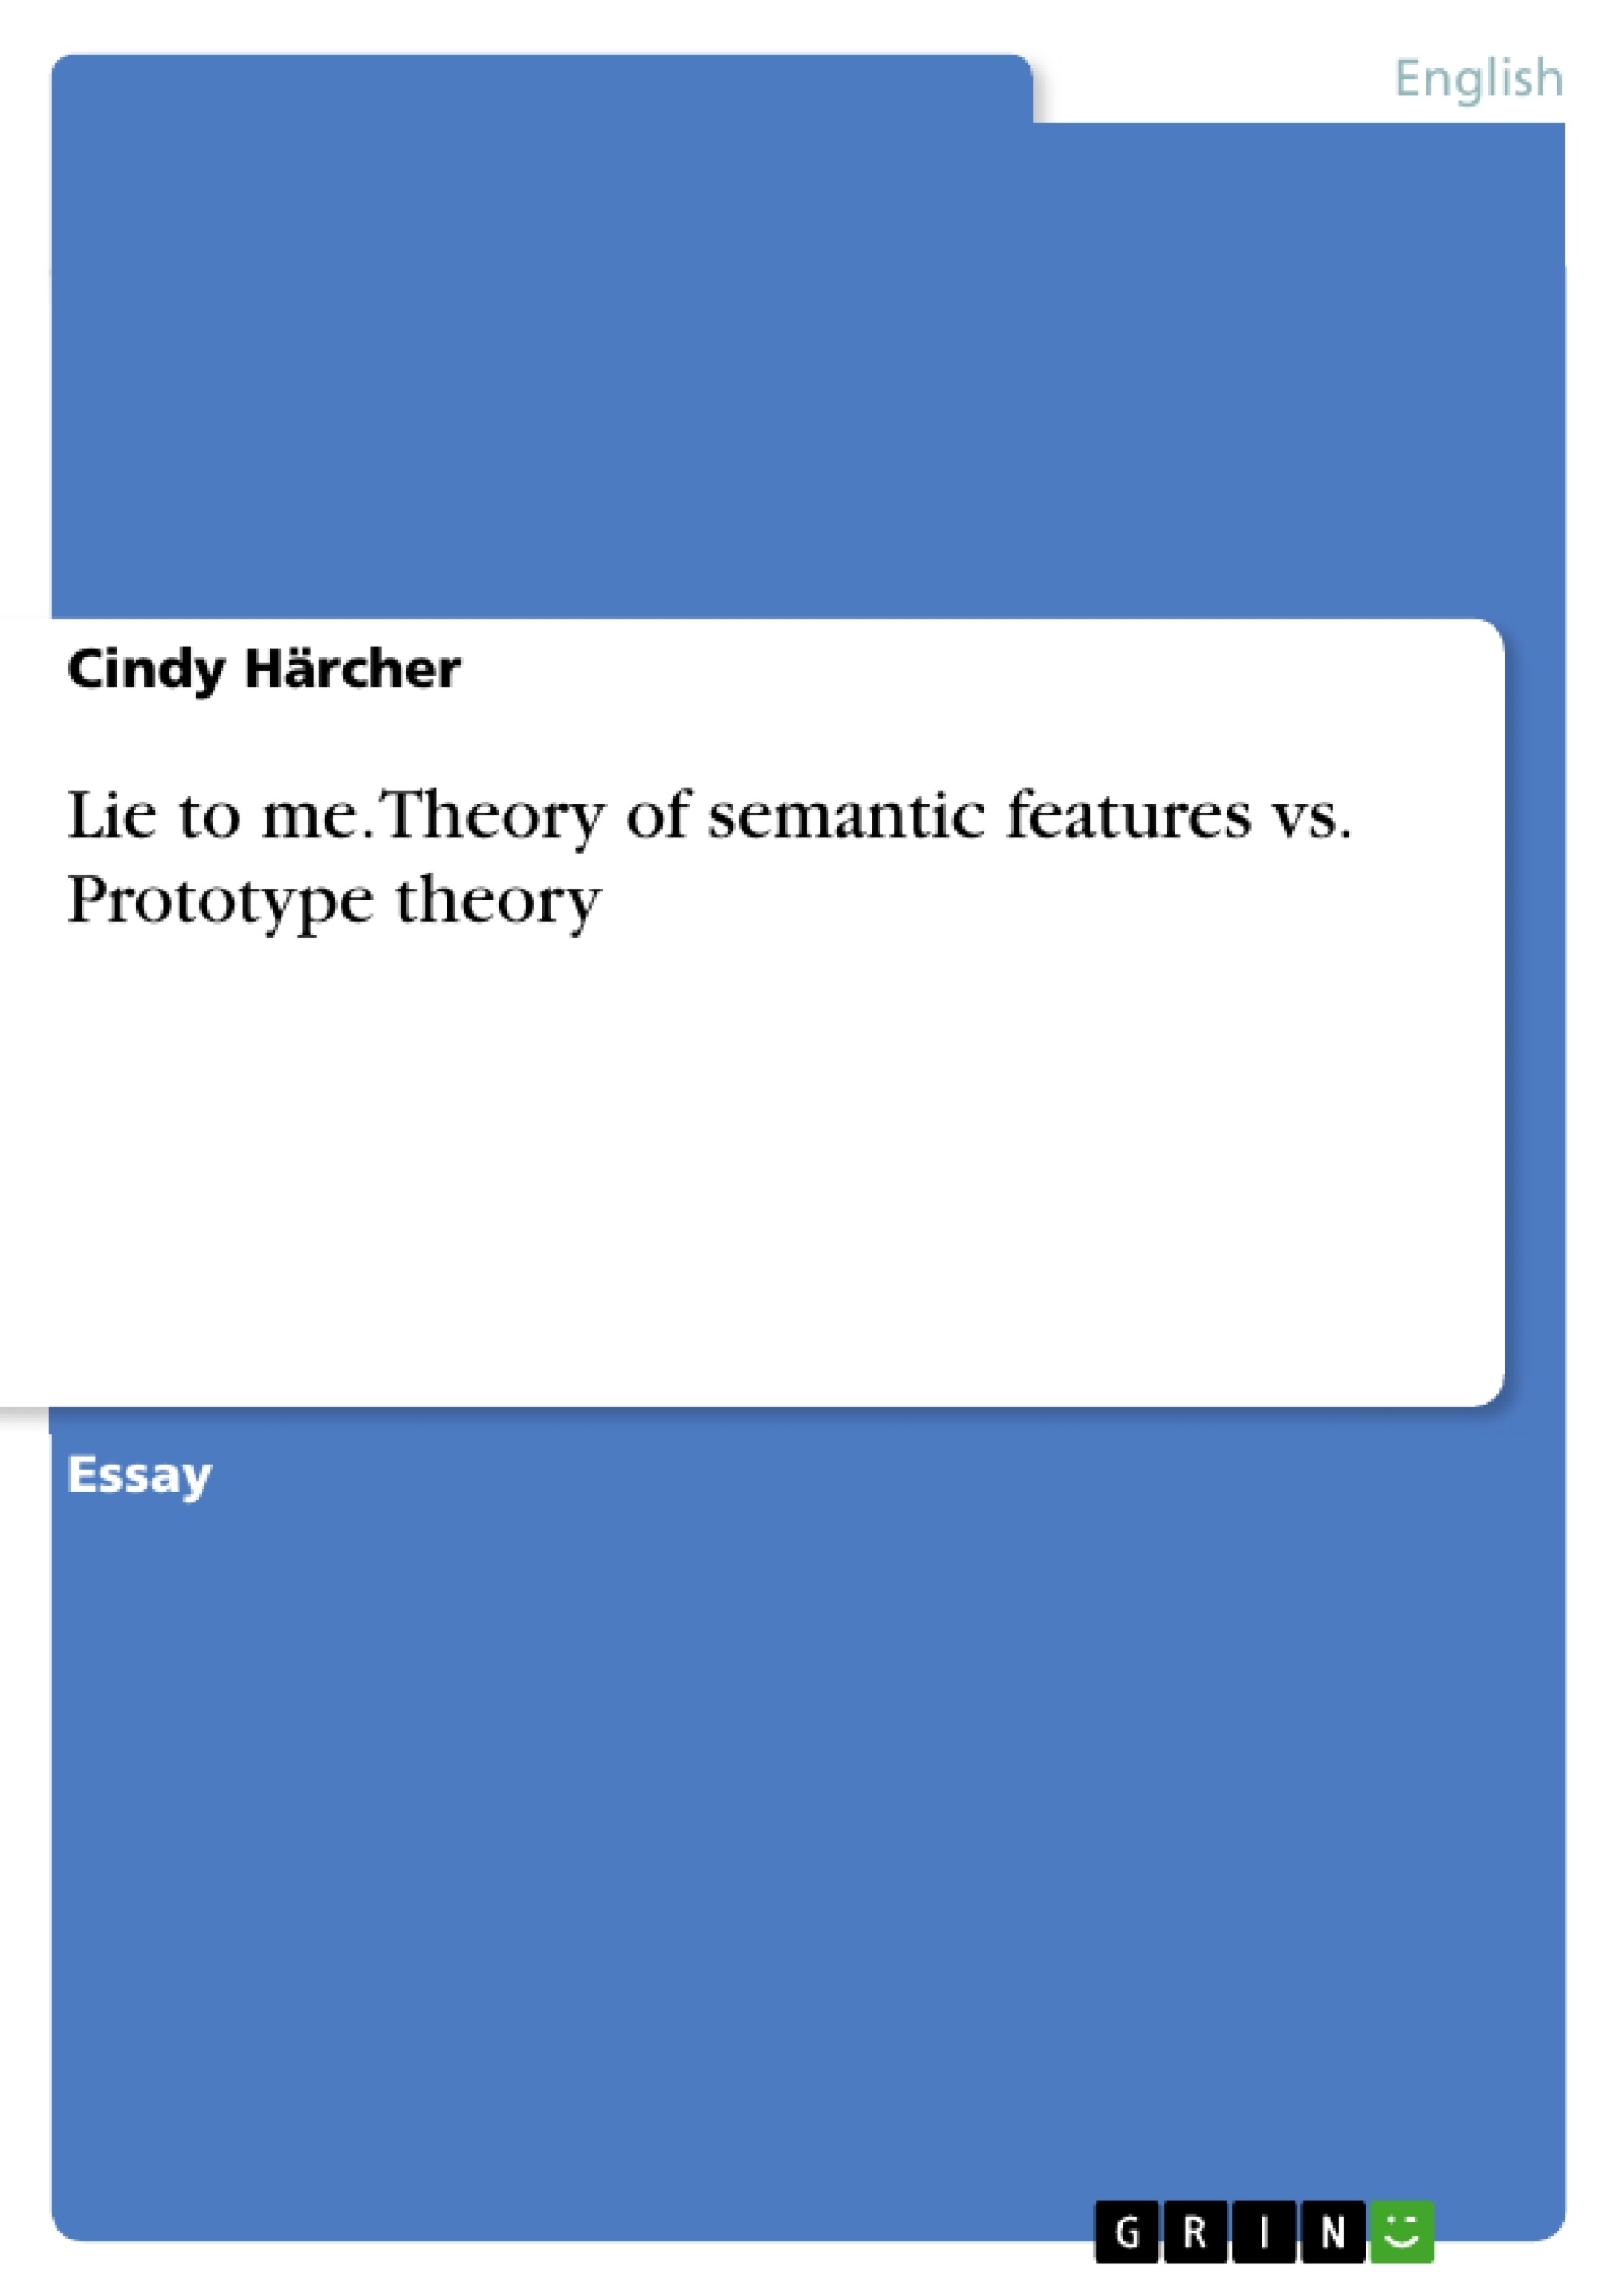 Titre: Lie to me. Theory of semantic features vs. Prototype theory